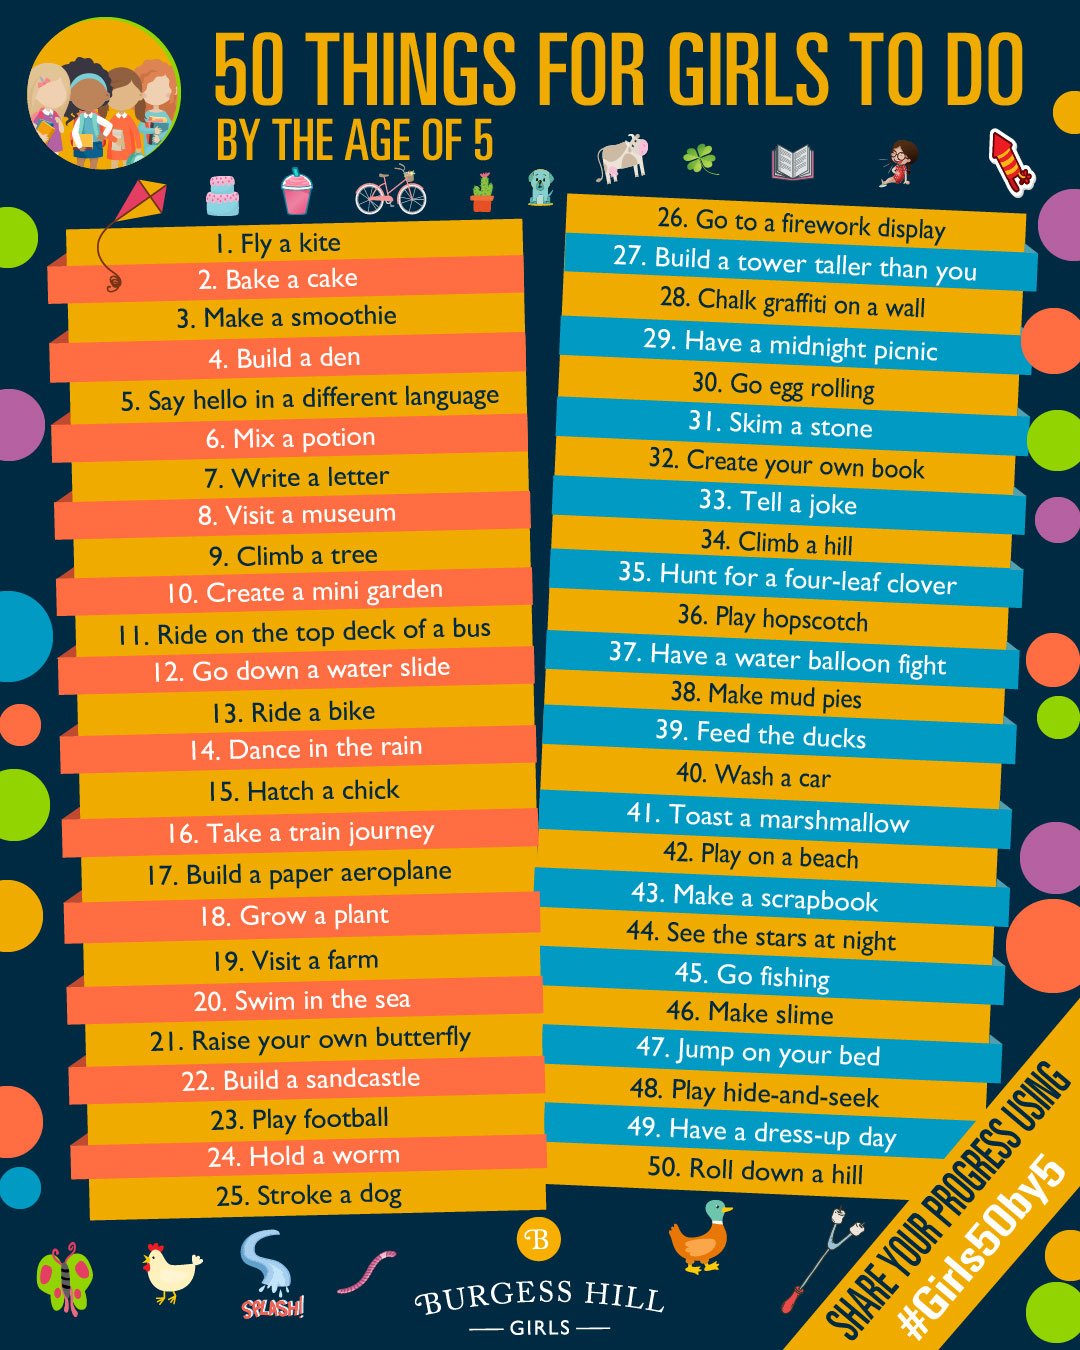 50 Things For Girls To Do By The Age of Five - Burgess Hill Girls